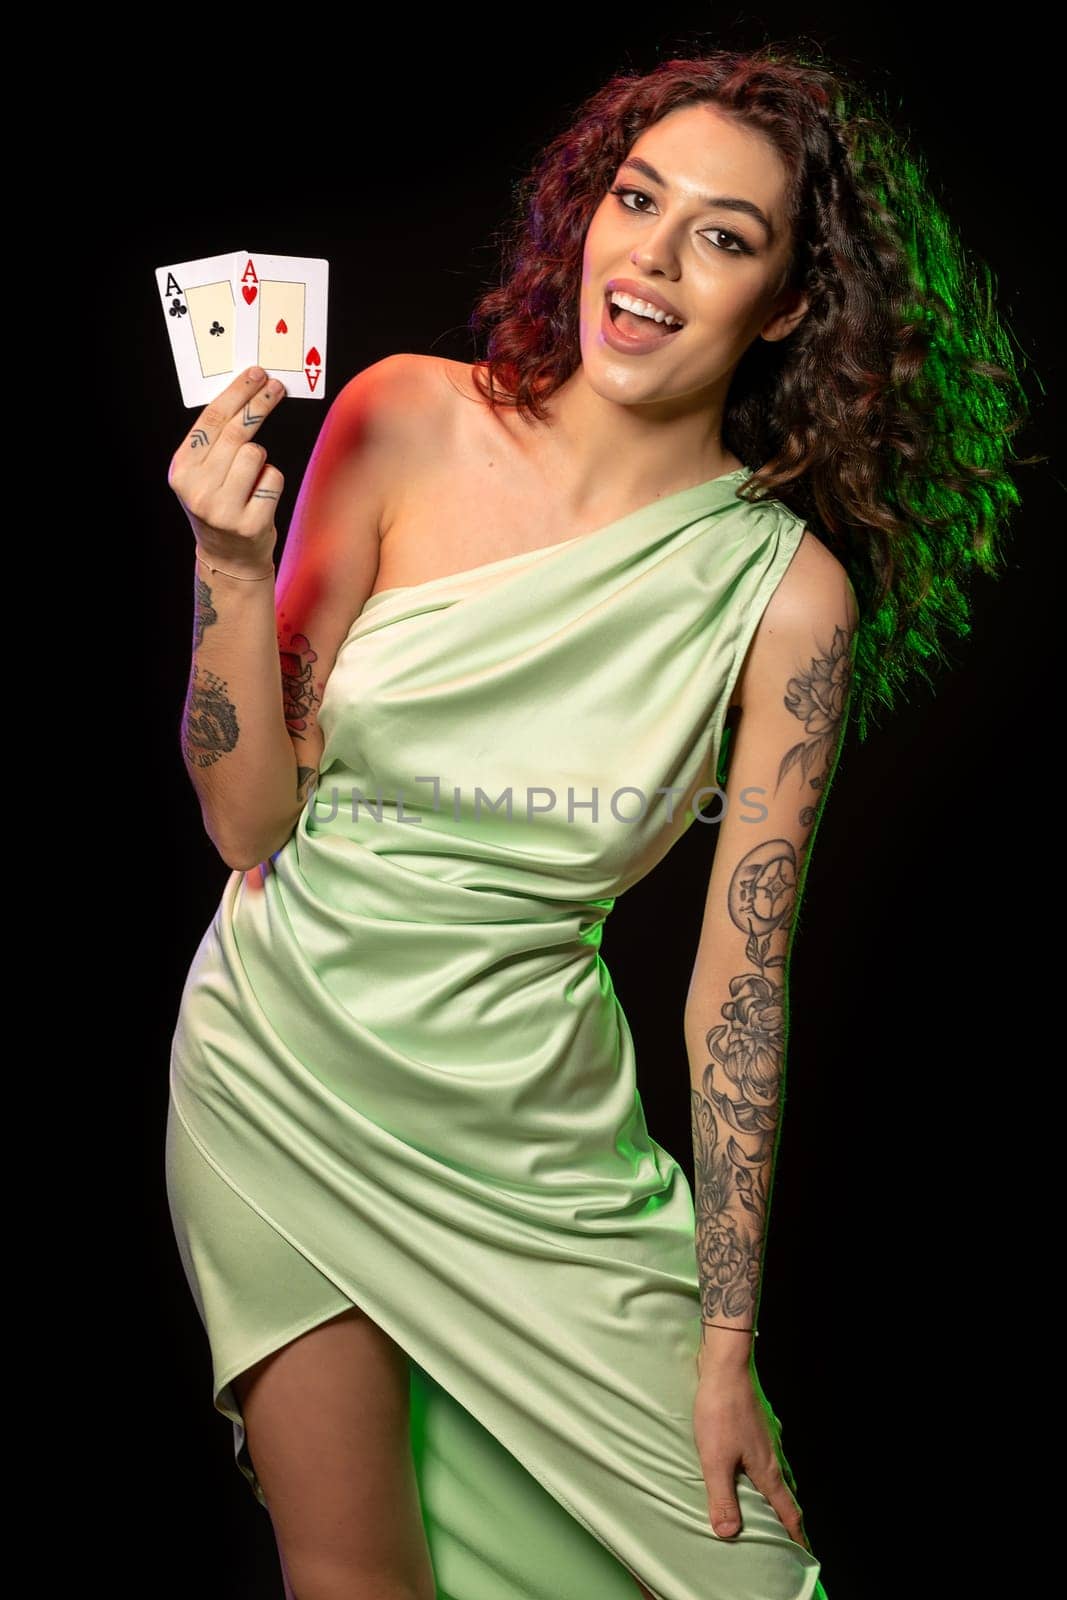 Cheerful stylish young woman with wavy dark hair wearing in silk light green dress standing against black background, holding set of winning cards of pair of aces. Successful gambling concept